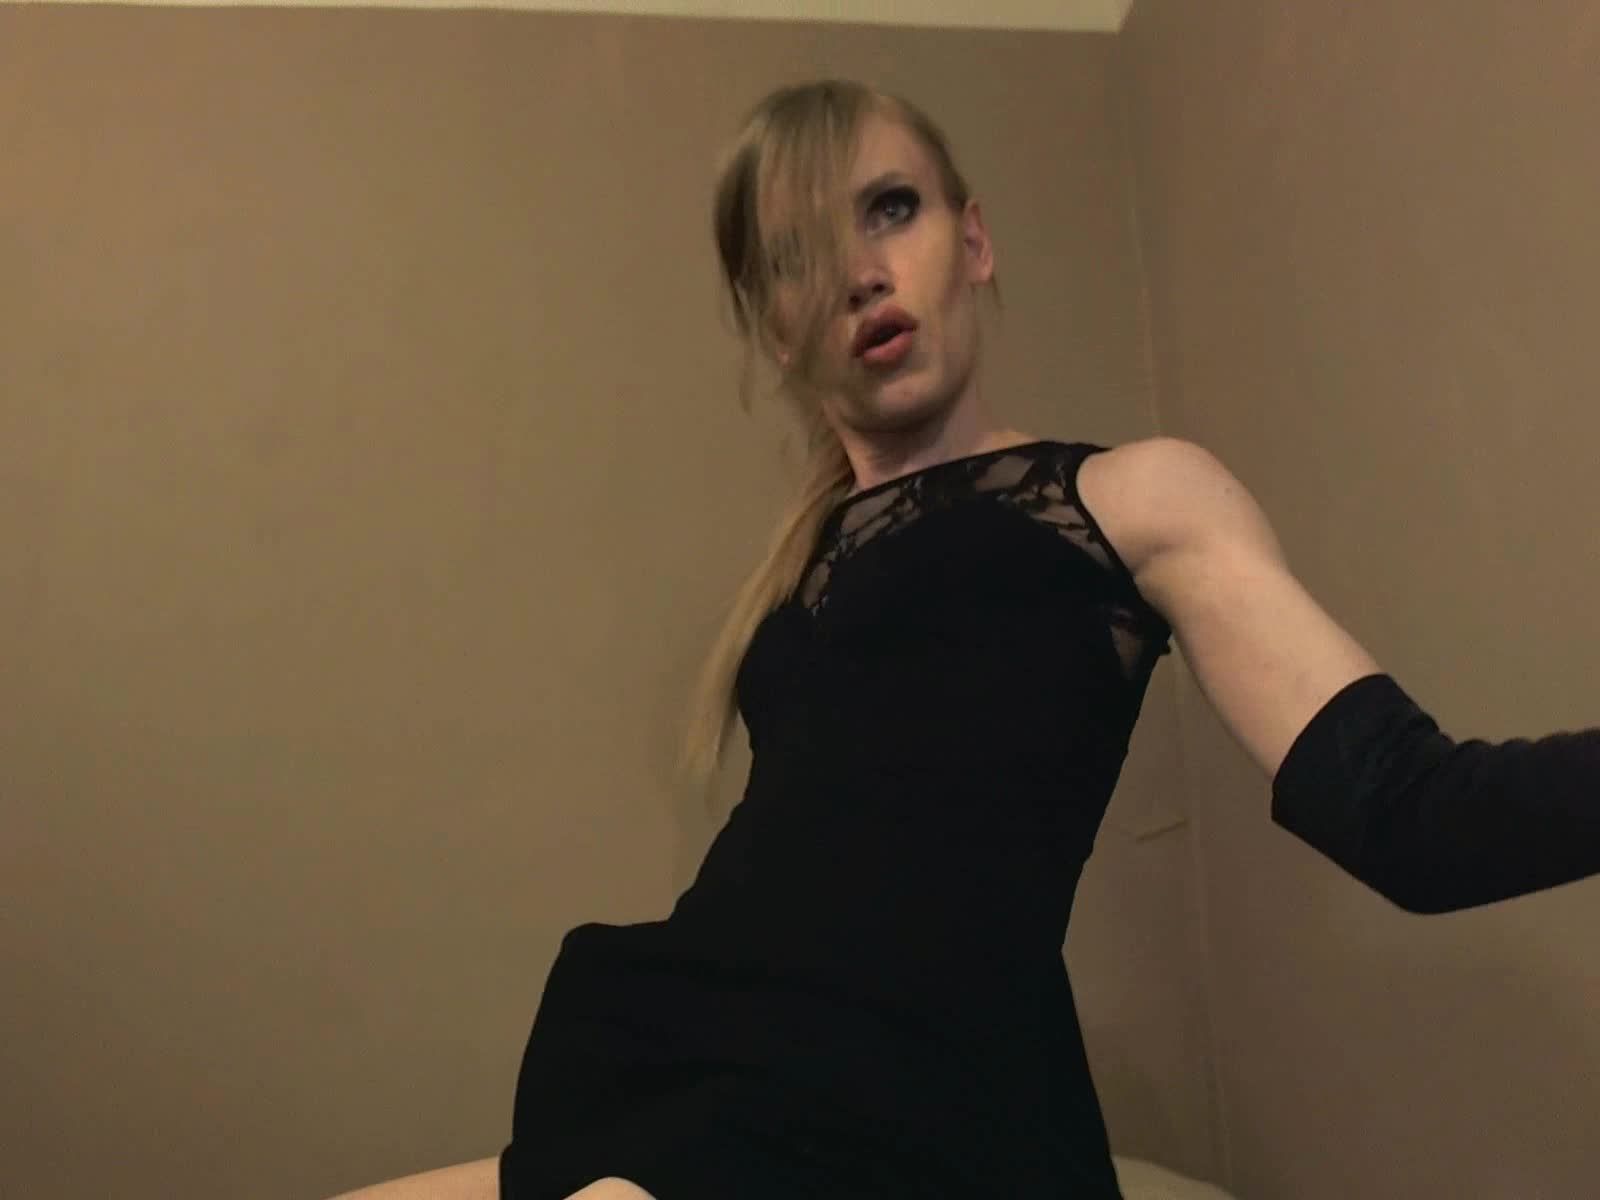 Sexy tranny flexing & hard cock tenting